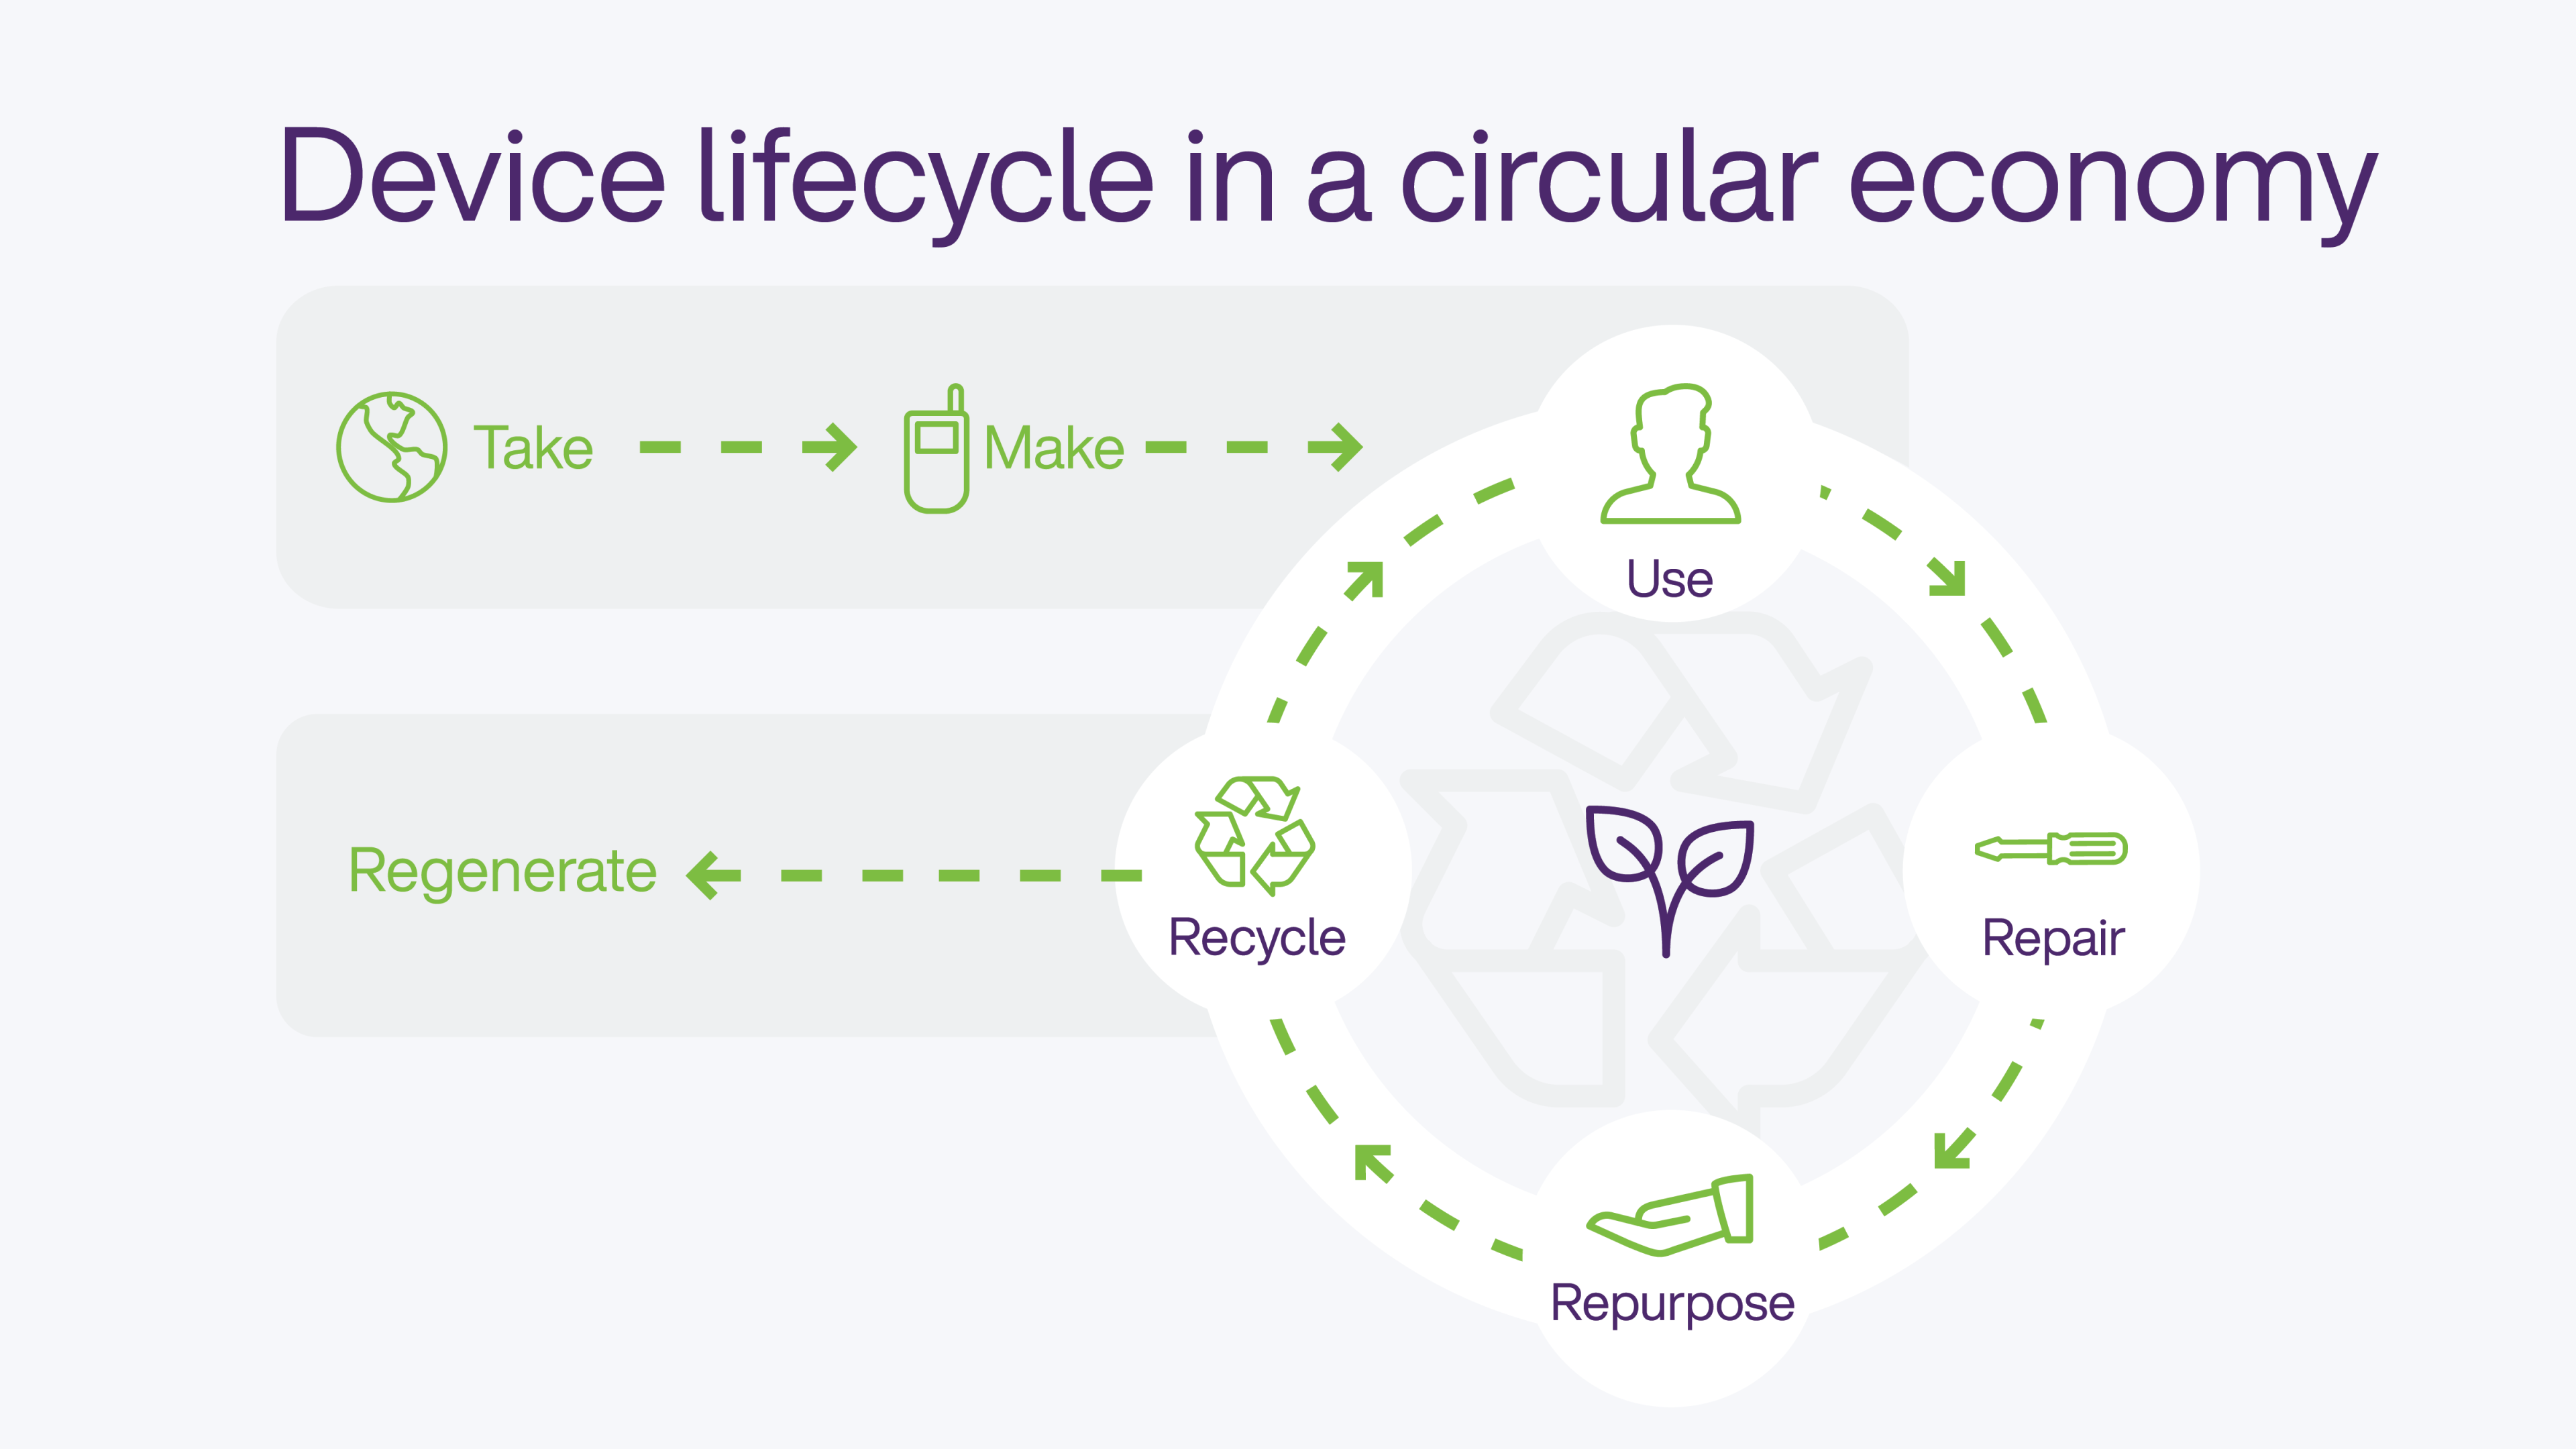 Social Impact - Environment - Let’s make our carbon footprint smaller - CE Device Cycle